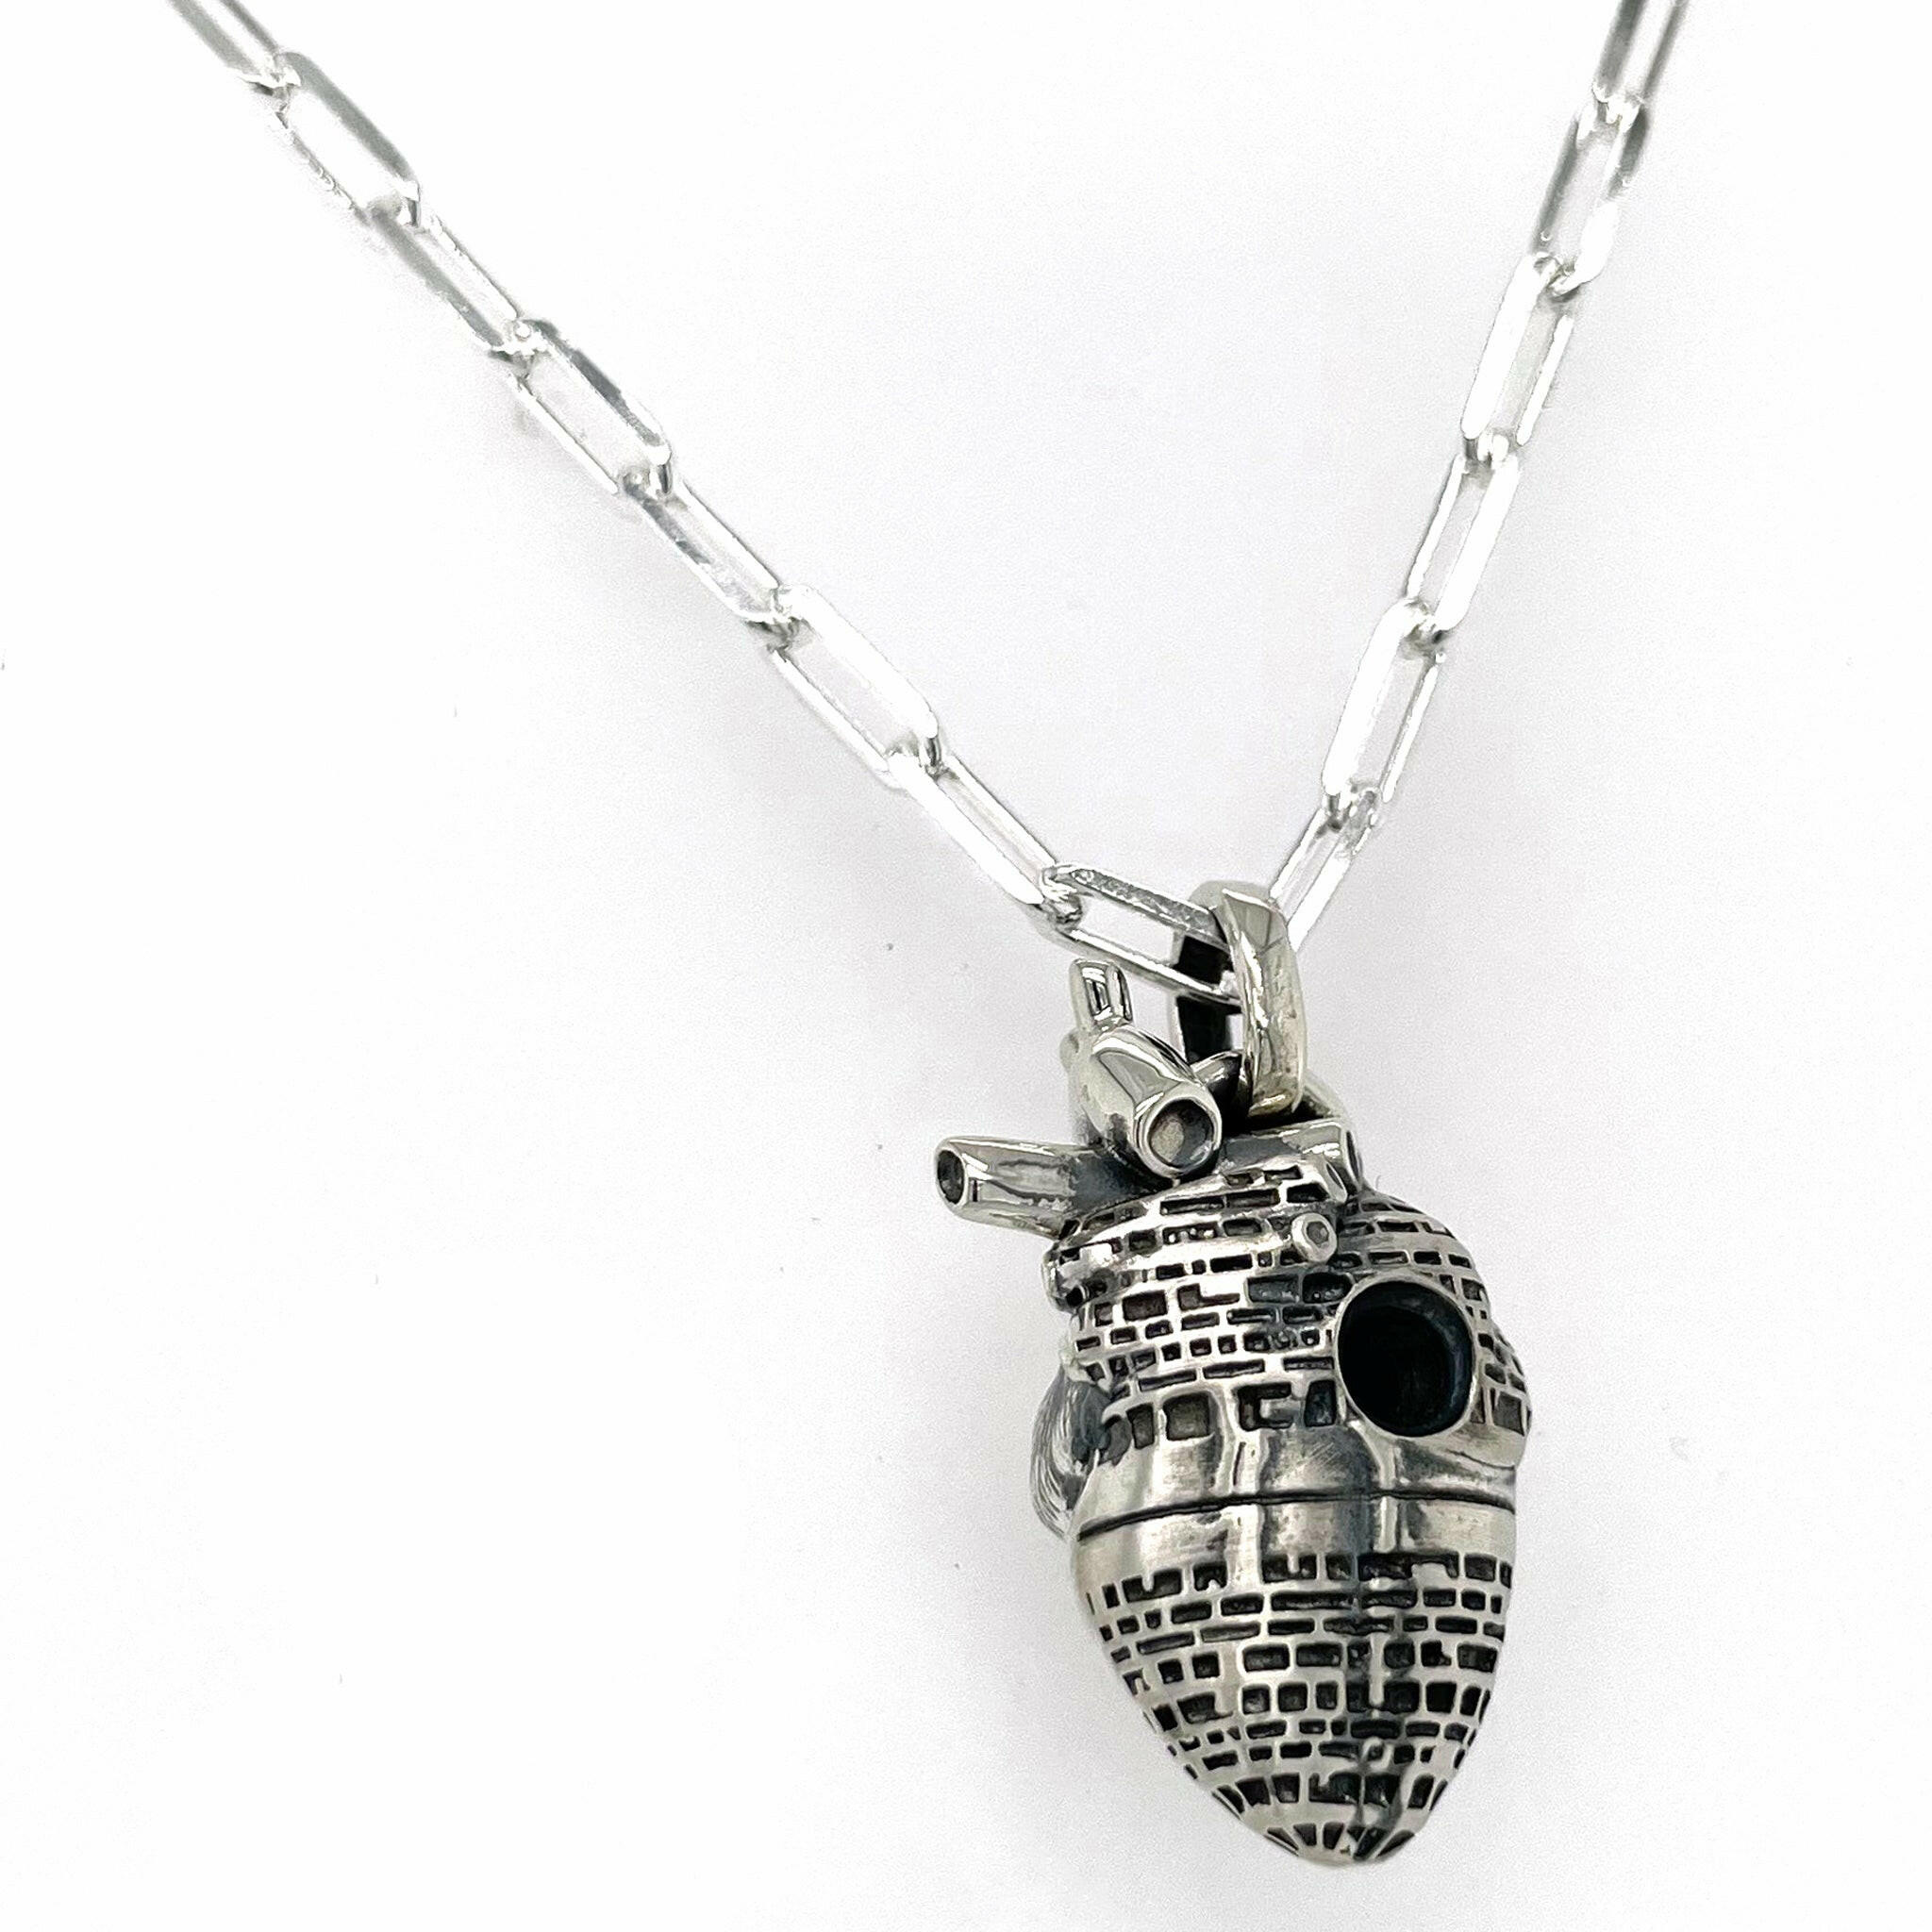 back view of fatal flaw pendant made of sterling silver , pendant resembles an atomical heart with hole in the center surrounded by an star wars like architectural design